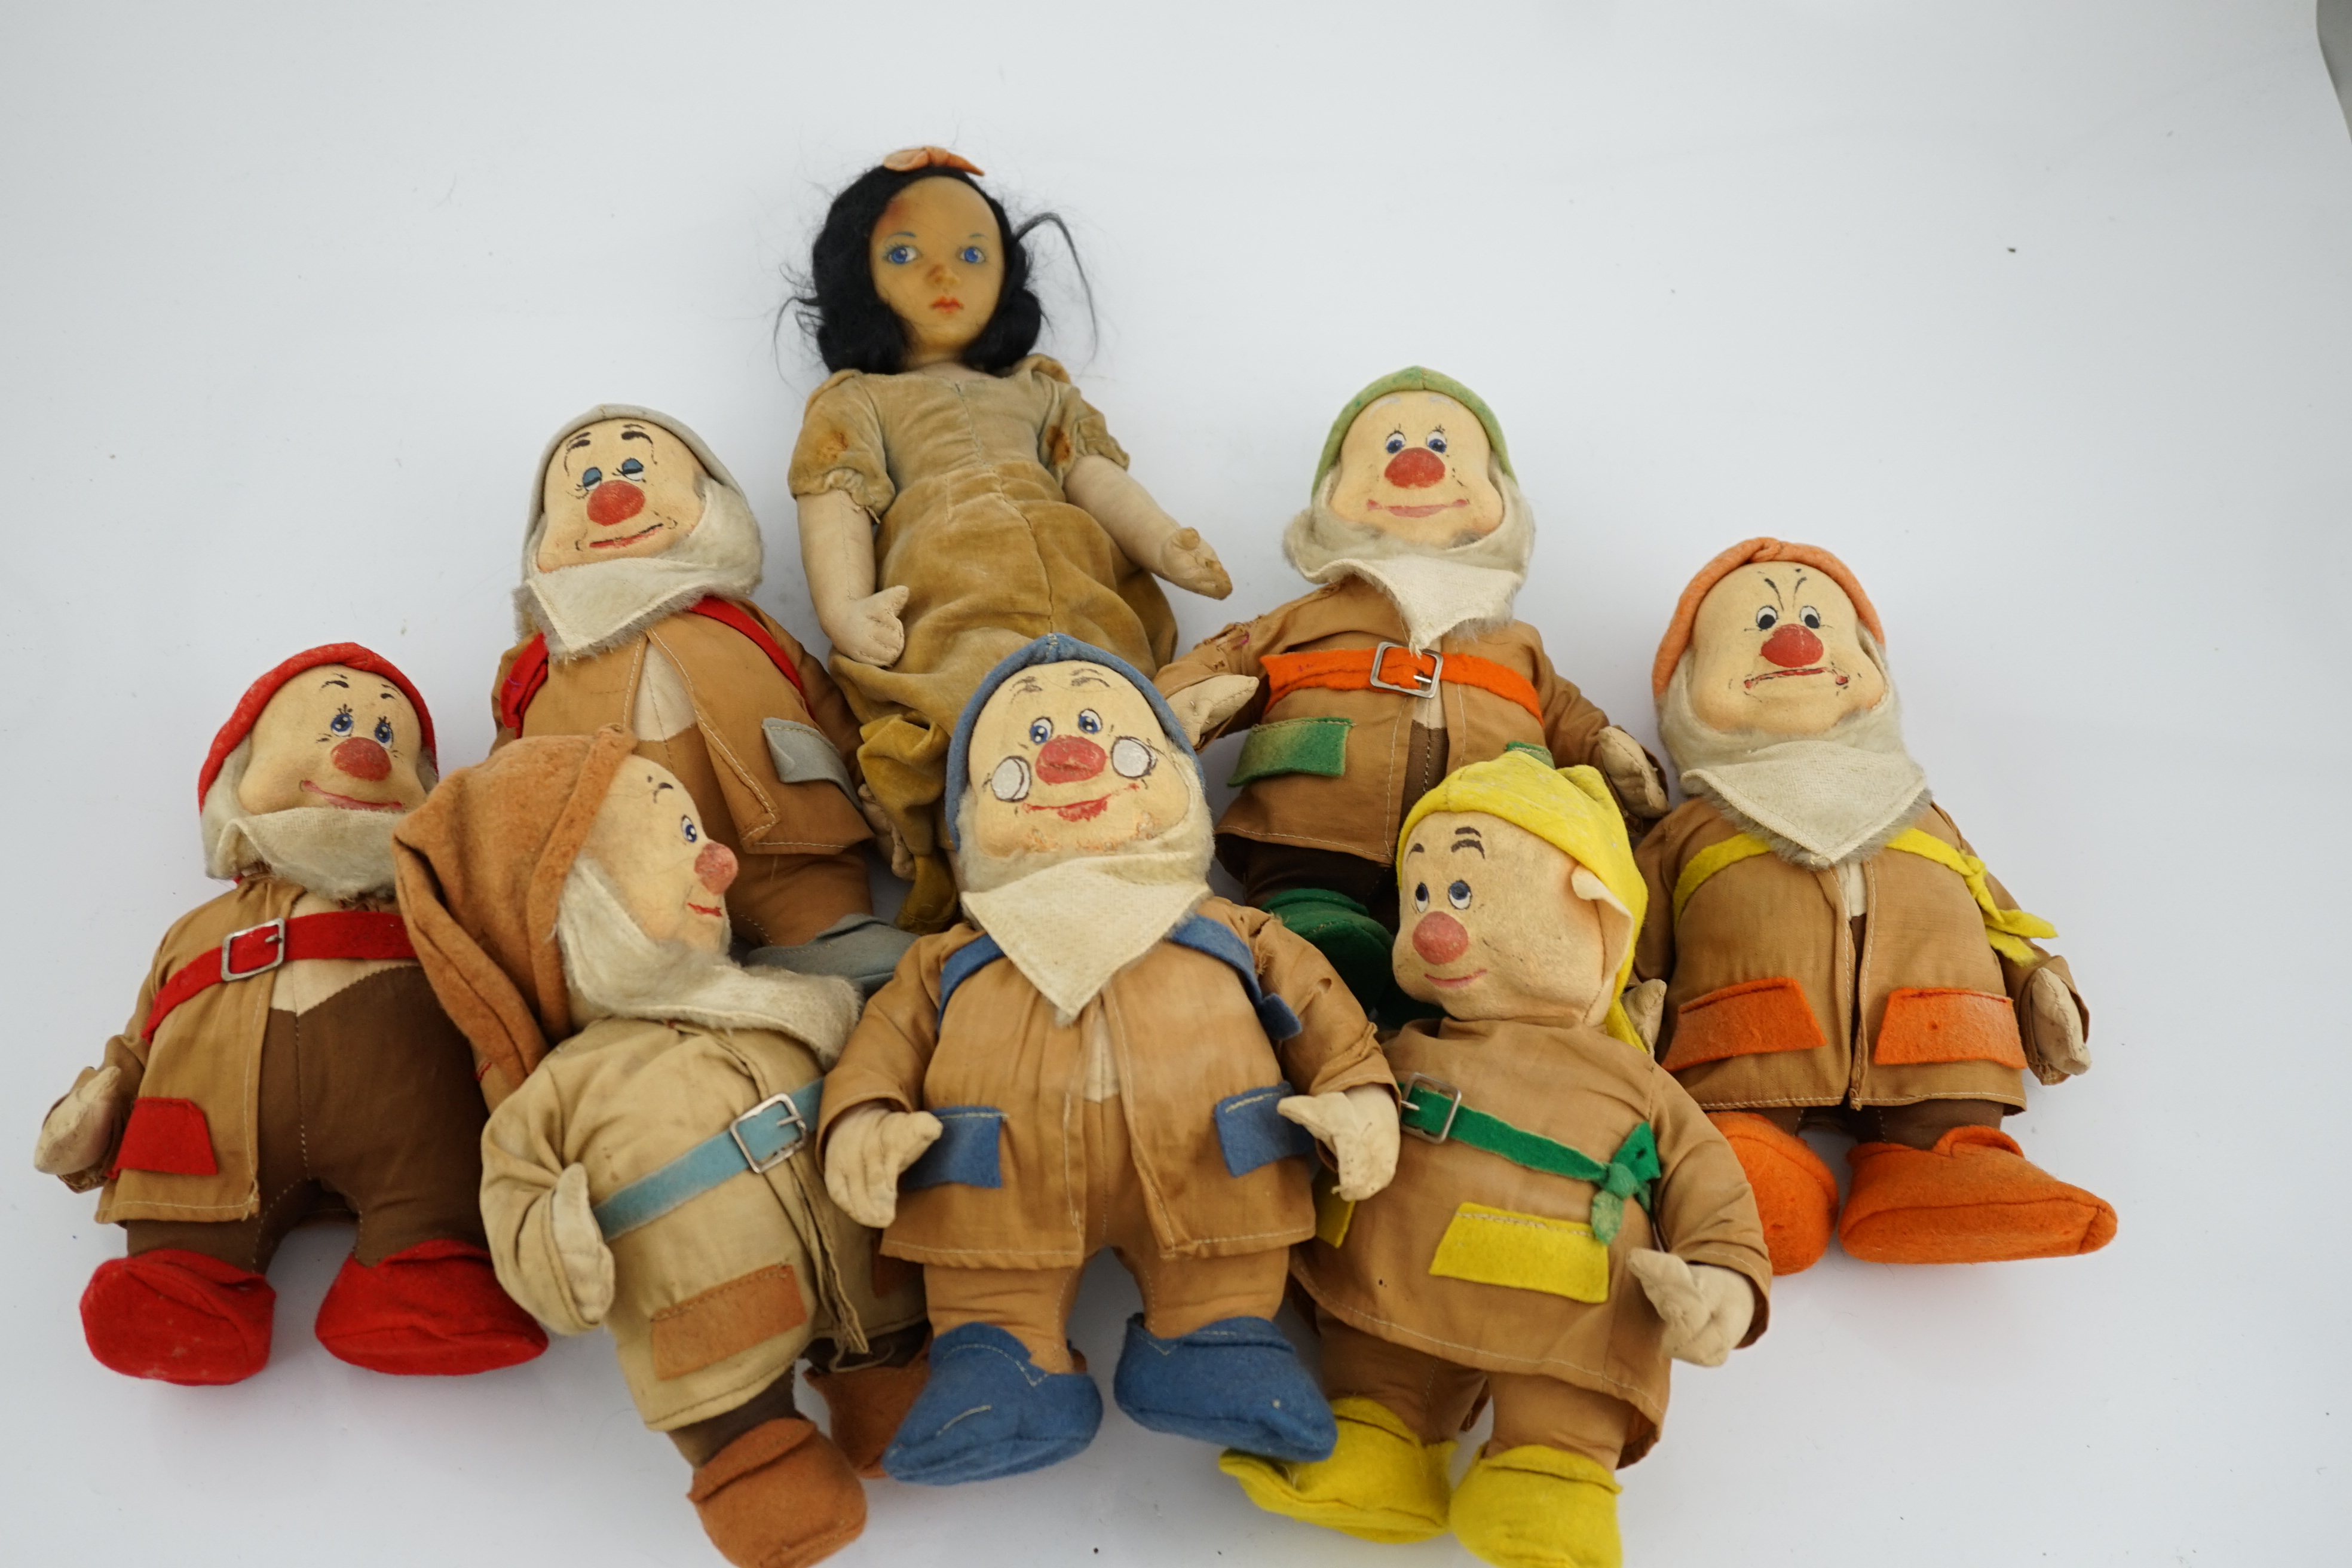 A set of Merrythought Snow White and the Seven Dwarves, Snow White with Merrythought label to the sole of her foot, the Dwarves could possibly be made by either Merrythought or Chad Valley, Snow White 36cm high